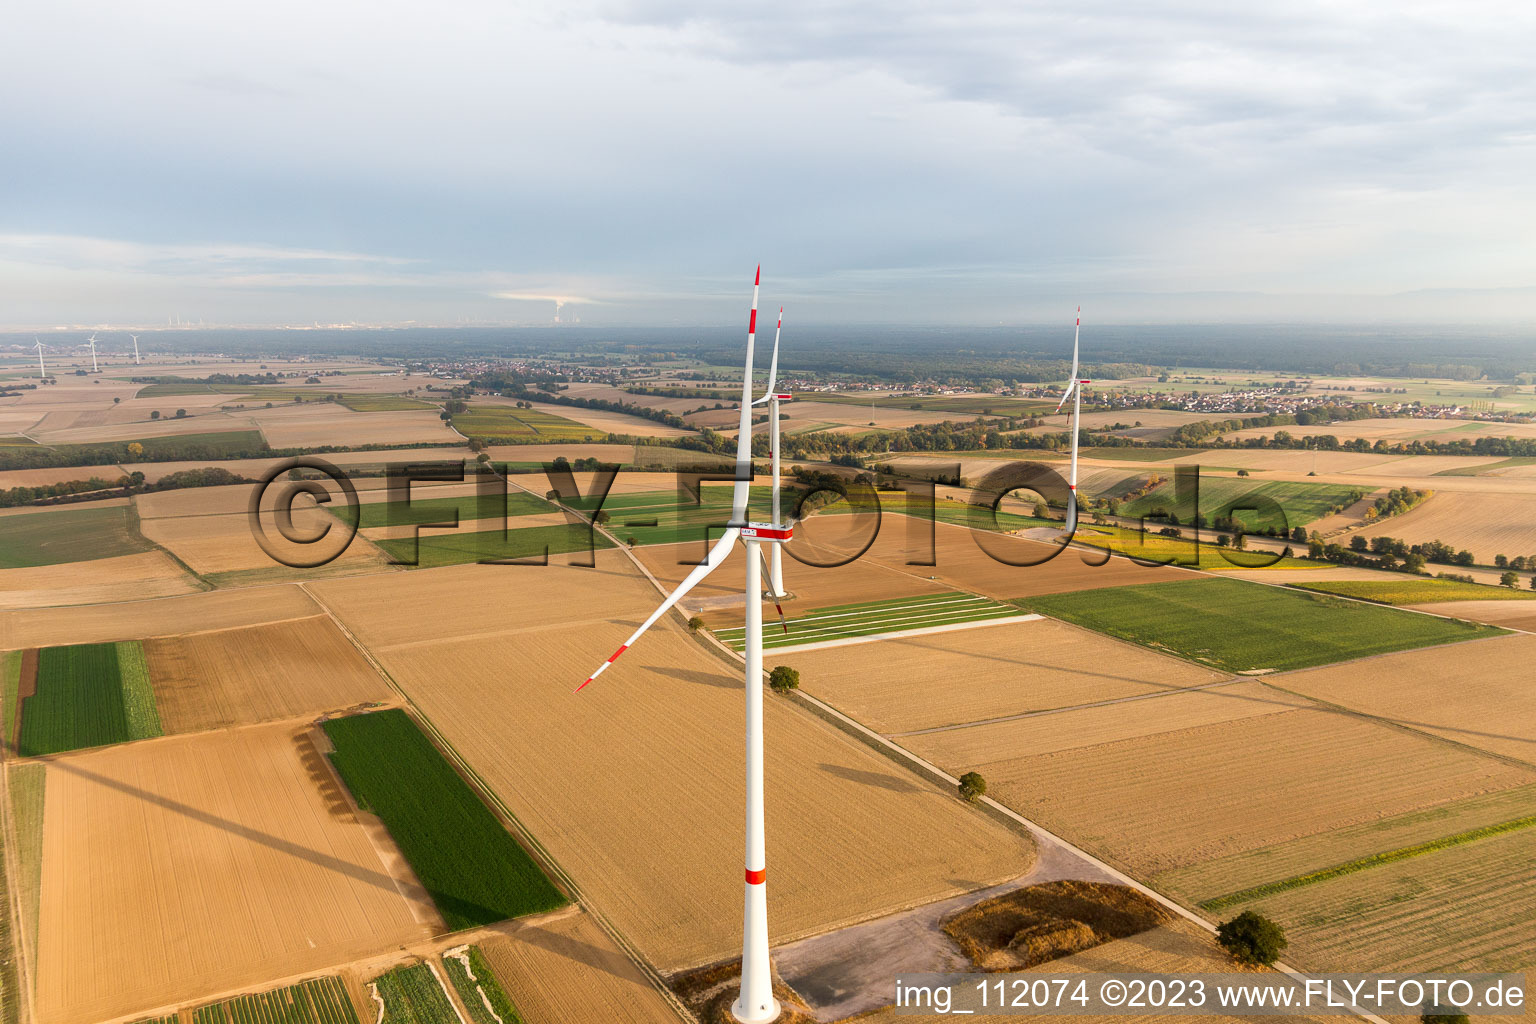 EnBW wind farm - wind turbine with 6 wind turbines in Freckenfeld in the state Rhineland-Palatinate, Germany viewn from the air